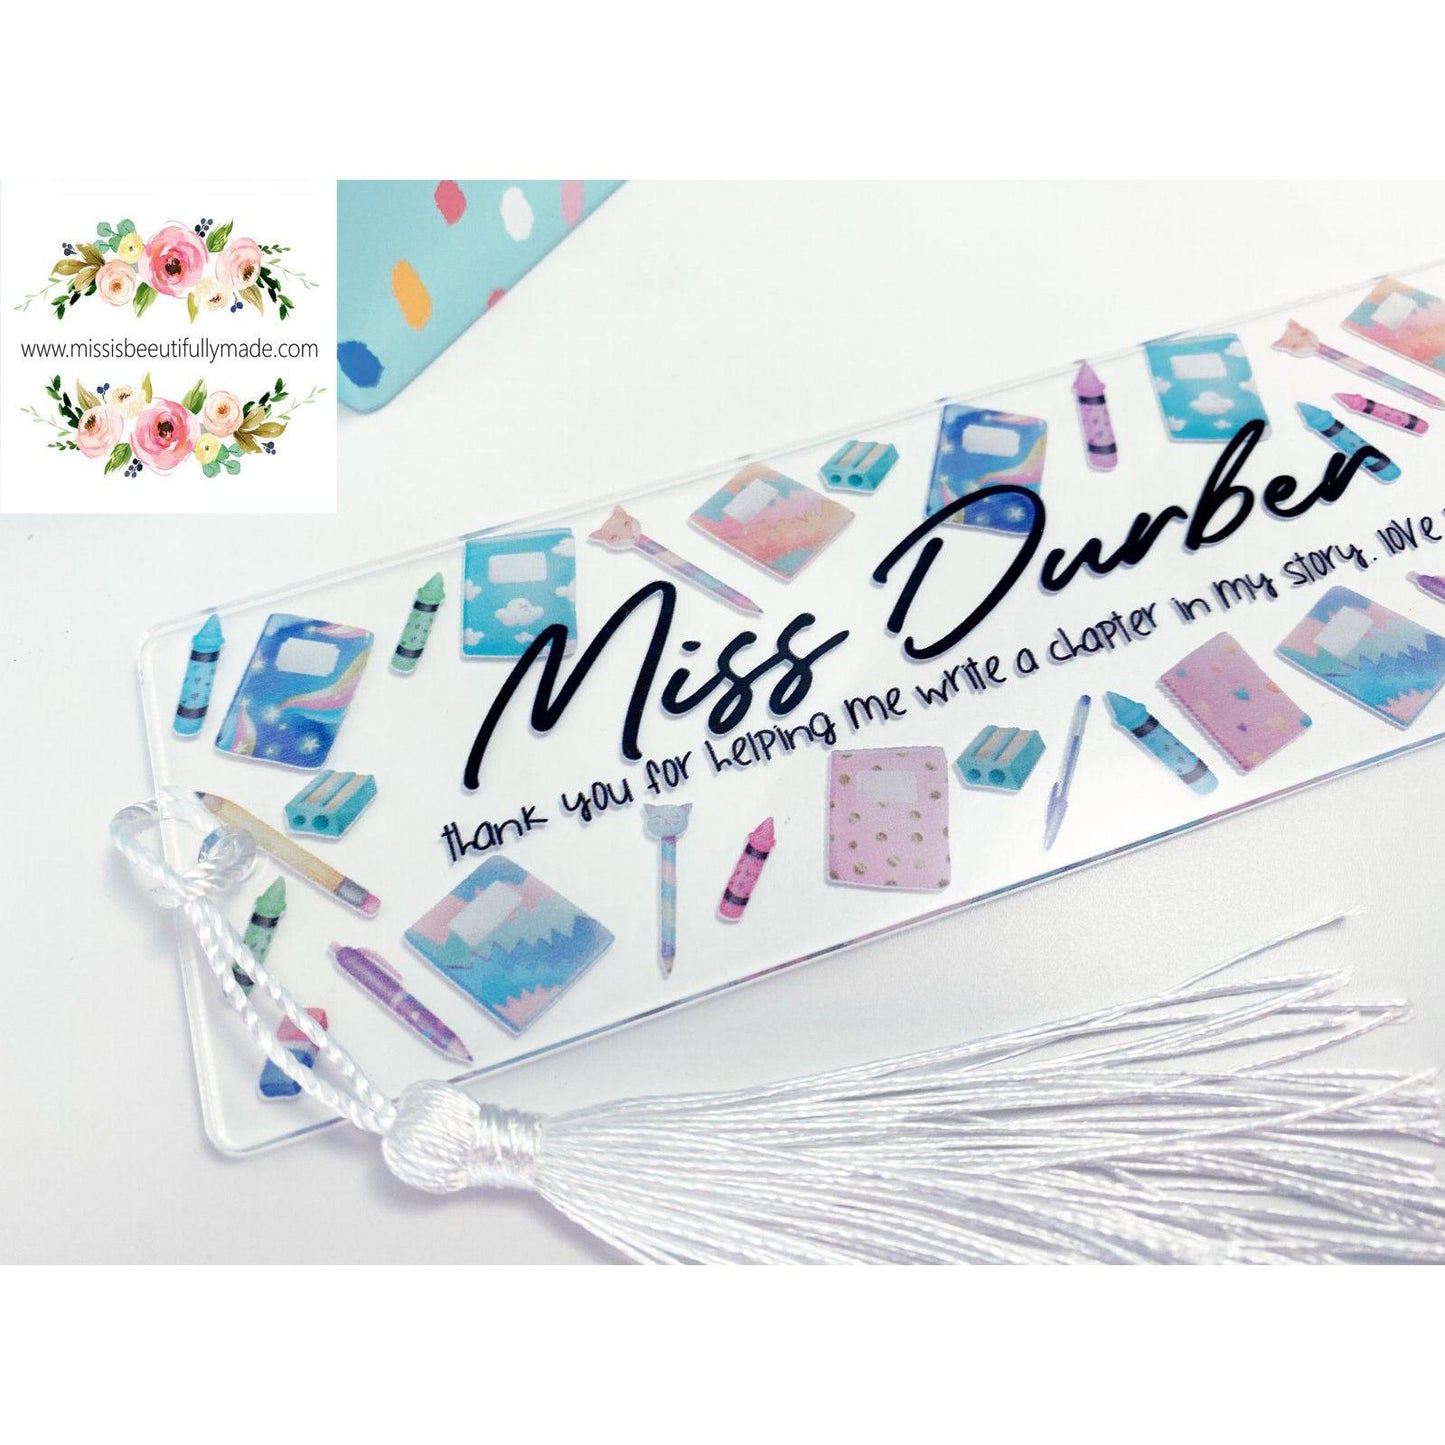 Clear Acrylic bookmark, personalised with child's and teachers name. Has a beautiful stationery design to the front and a white tassel to finish it off. Printed direct to the acrylic.